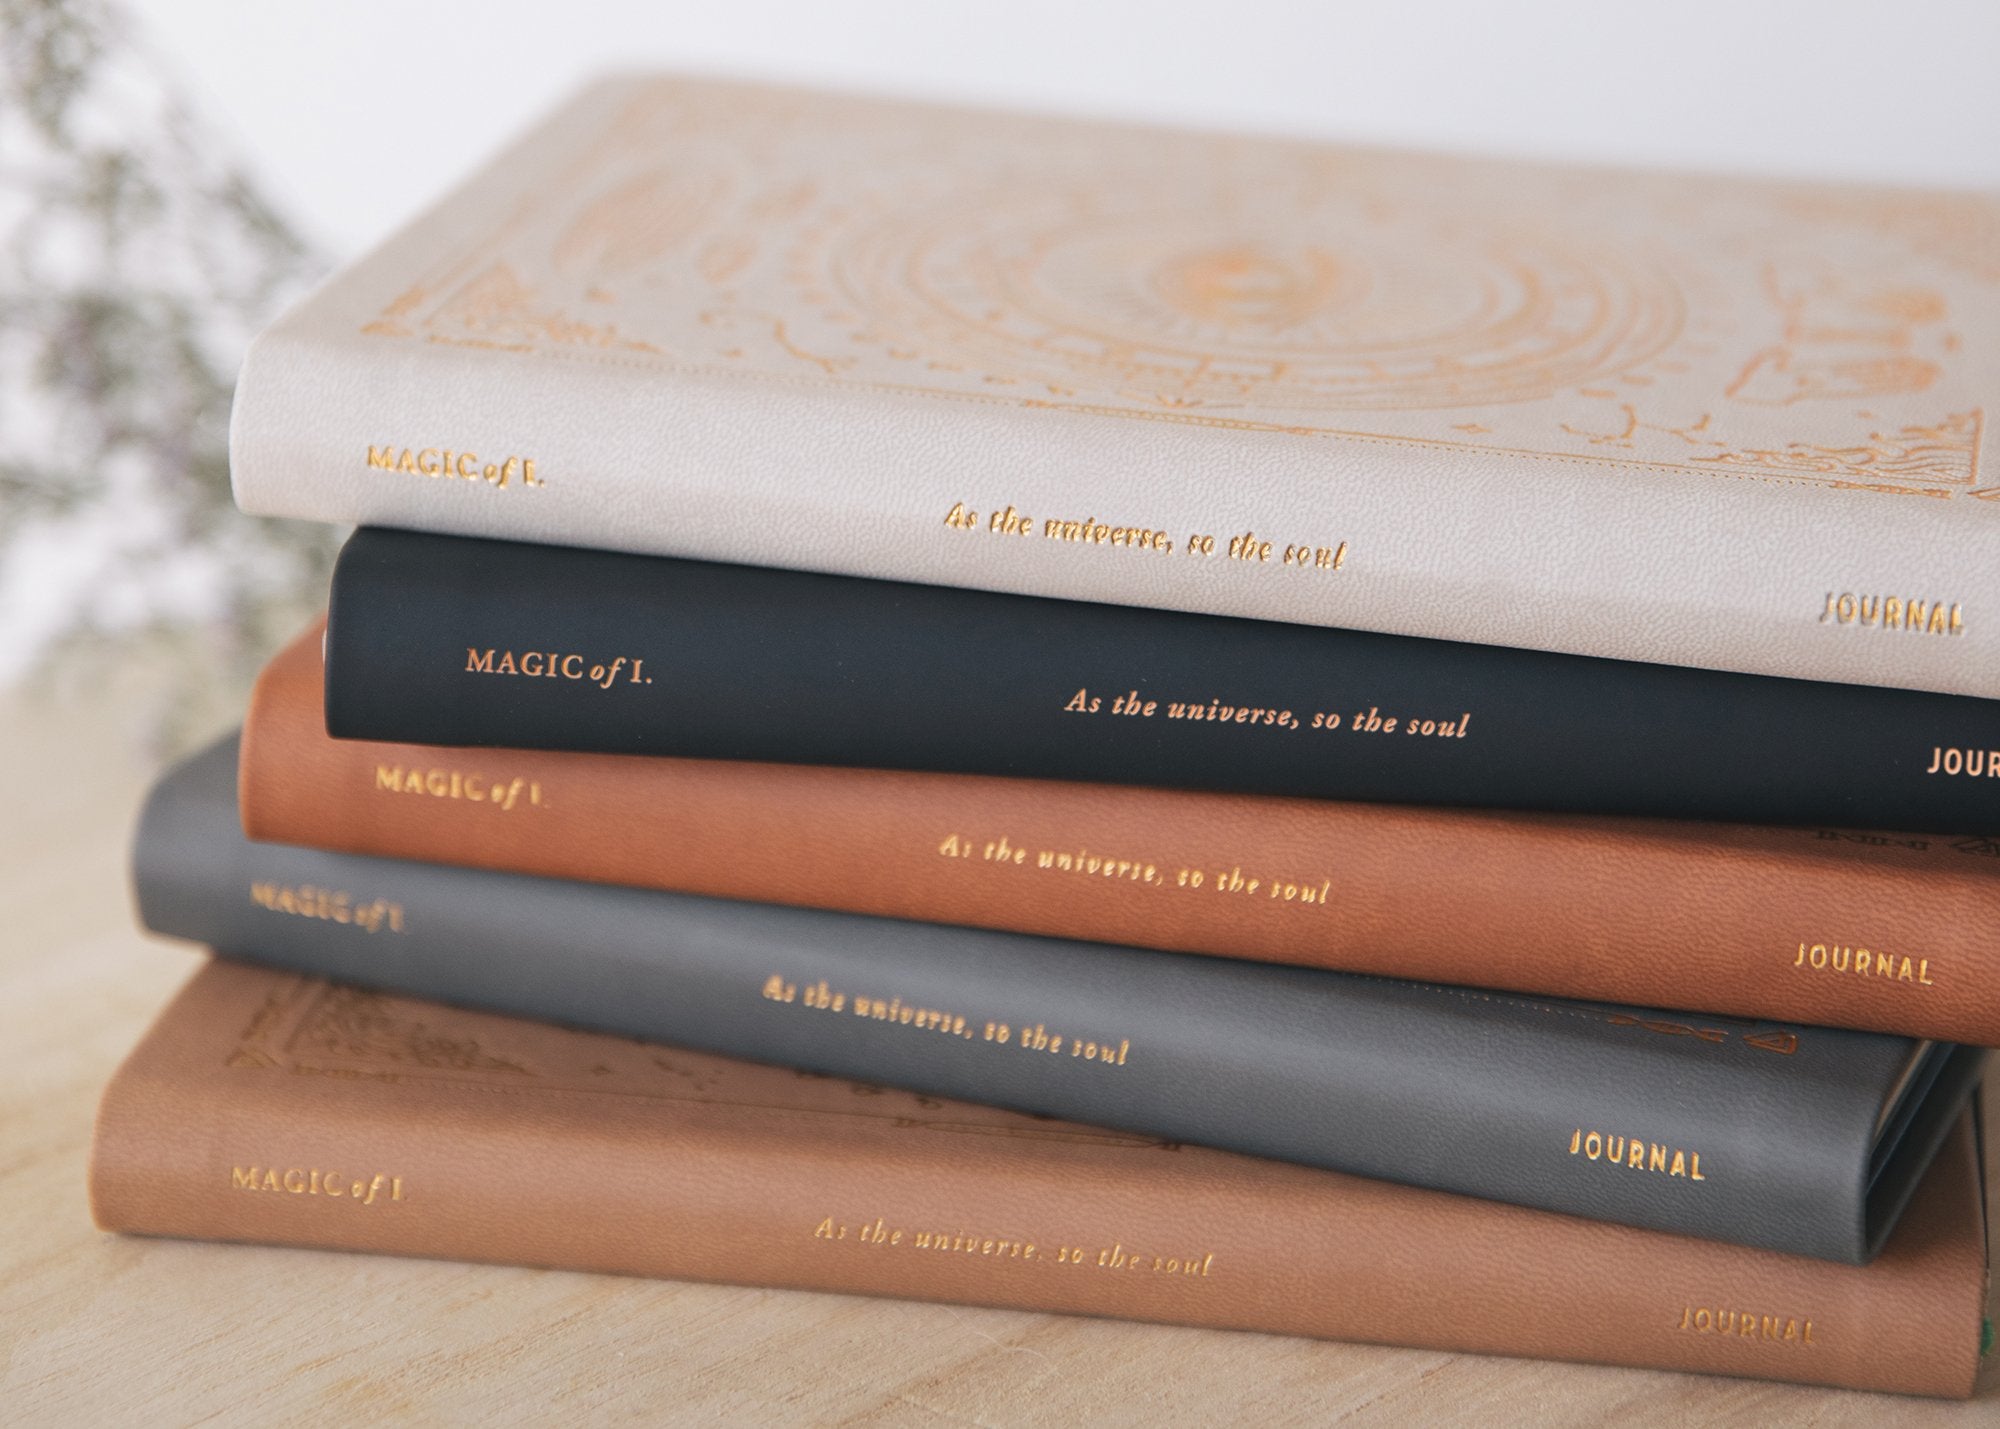 Magic of I. Vegan Leather Journal - Lined